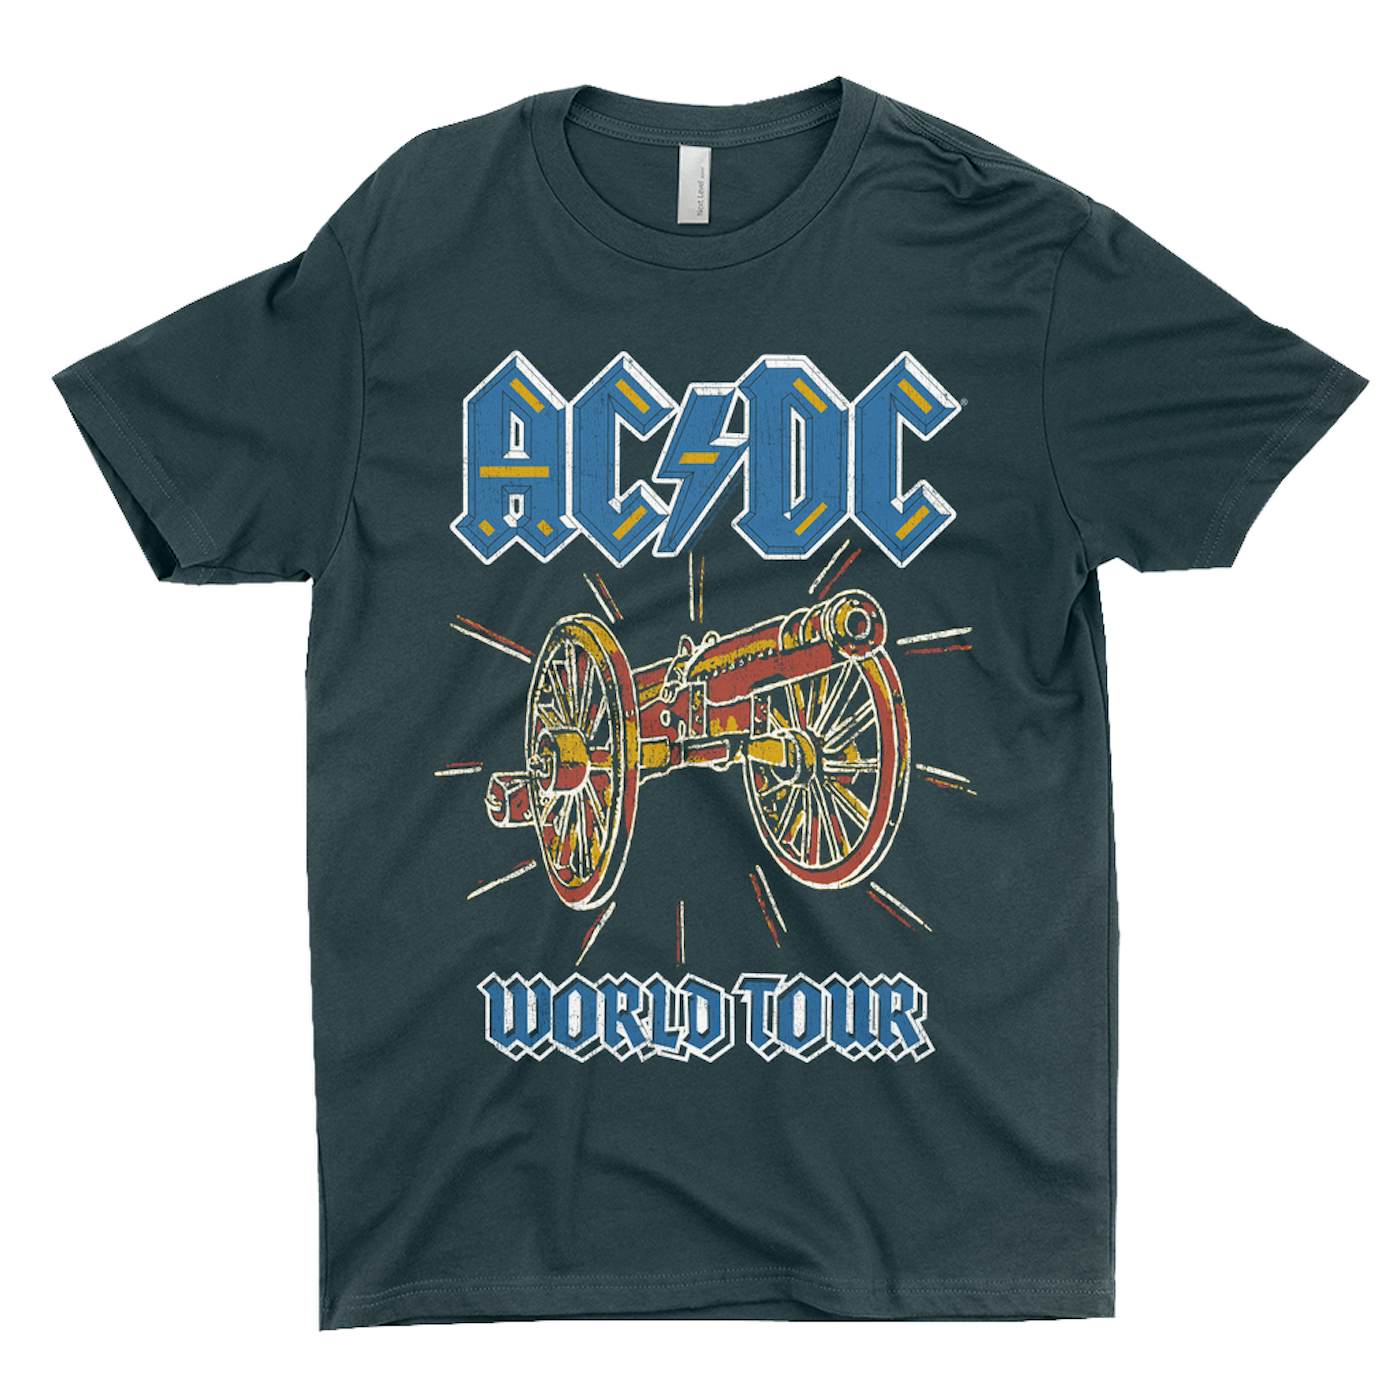 About Rock Shirt Cannon To T-Shirt Those | Image Tour AC/DC For World